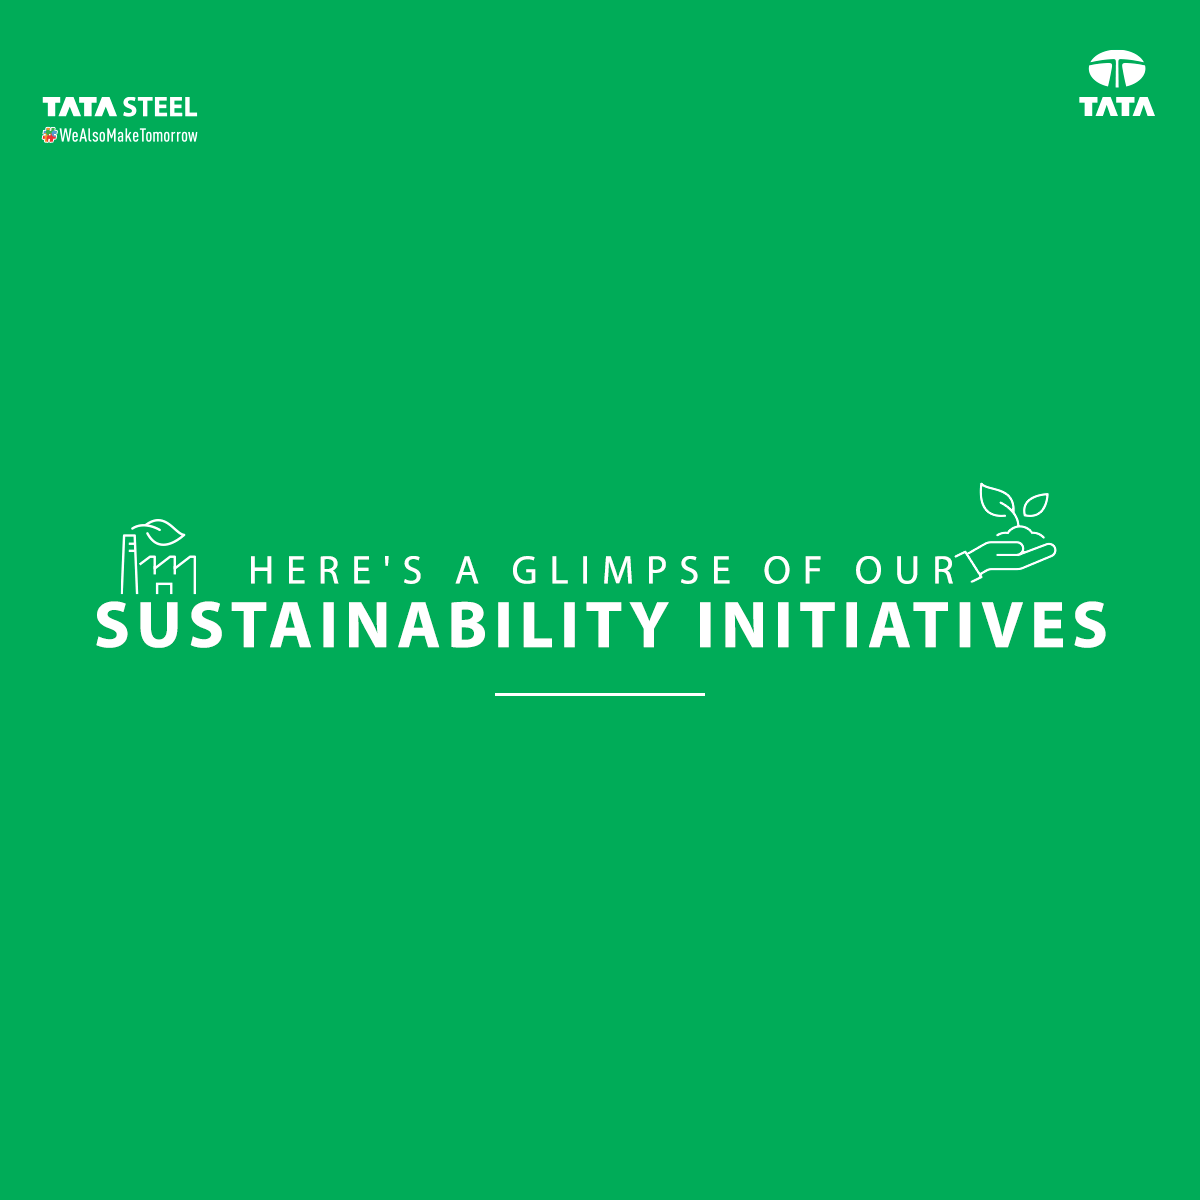 here is a glimpse of our sustainabilty initiatives